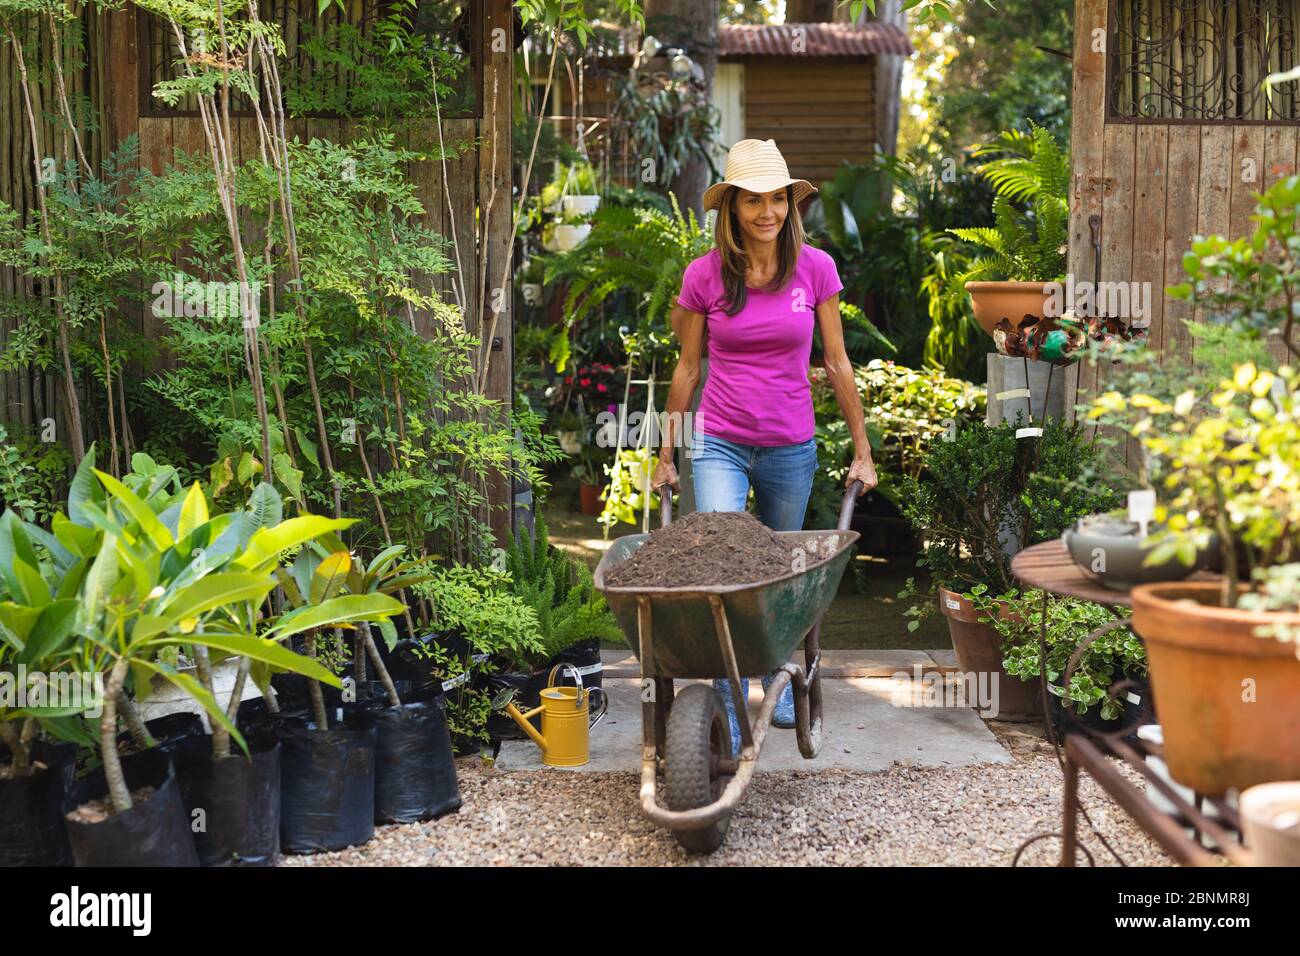 A Caucasian woman pushing a wheelbarrow filled with earth in a sunny garden Stock Photo